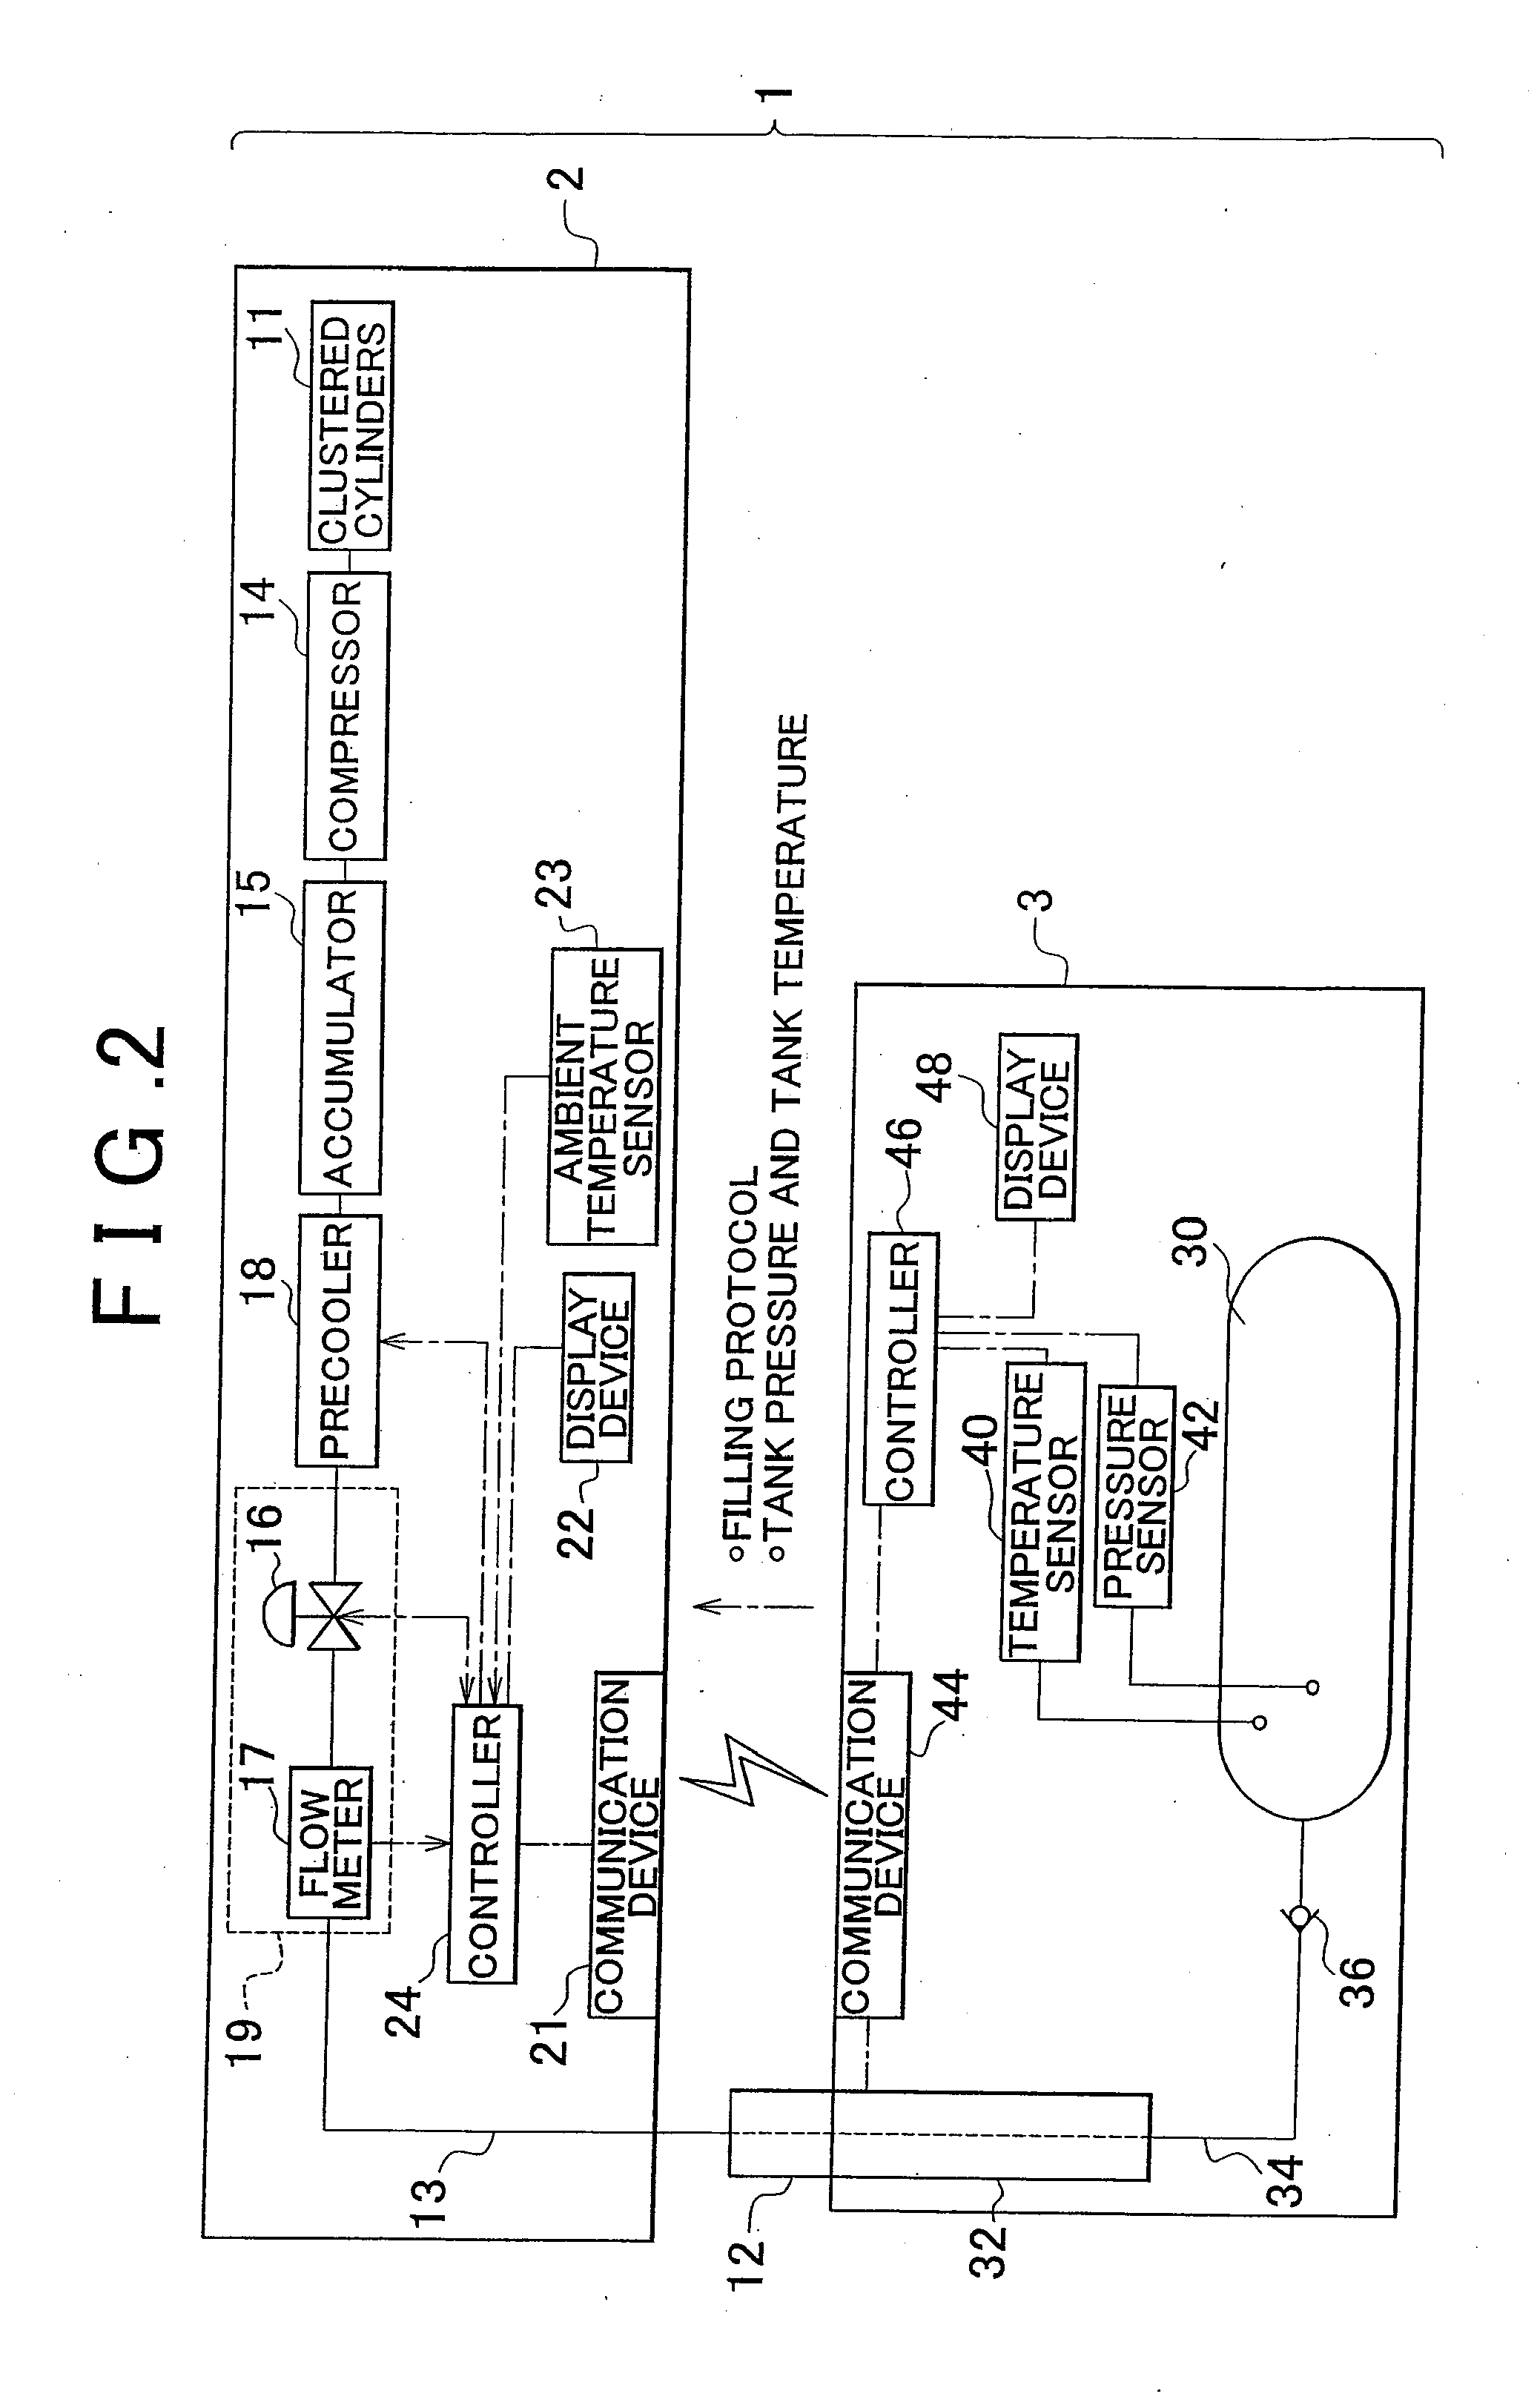 Gas filling system